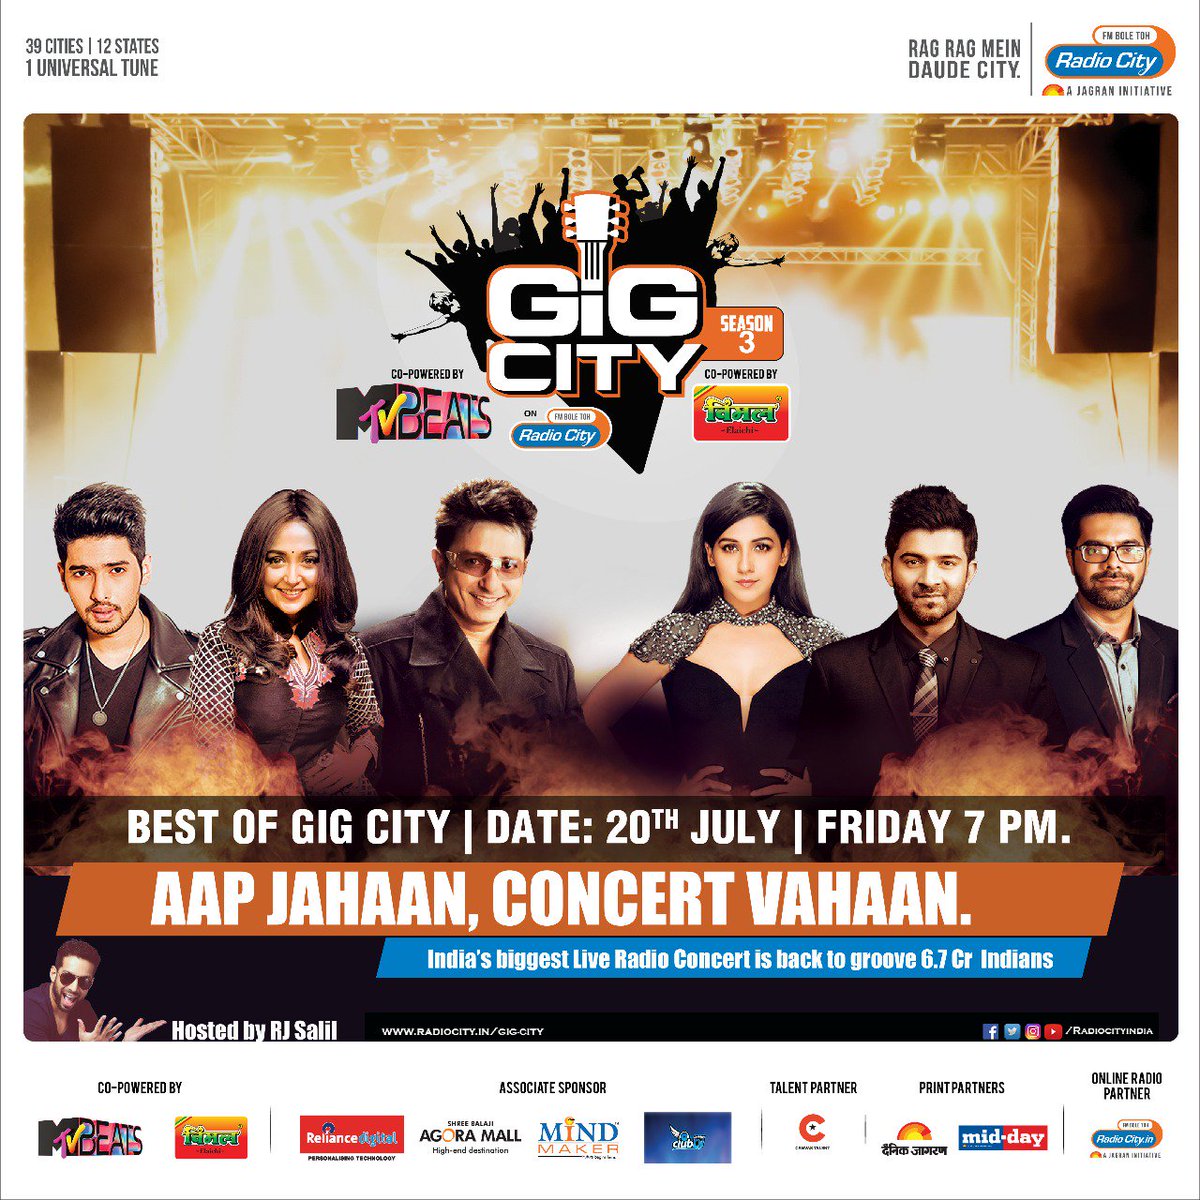 You asked for it & we have heard it! We will be playing 'Best of Gig City' this Friday only on Radio City 📻!
From @ArmaanMalik22 Ghar se Nikalte Hi to @sukhimusic retro hits of 90's, we will be playing it all!
Tag & Share with your friends now, because you cannot miss this one!